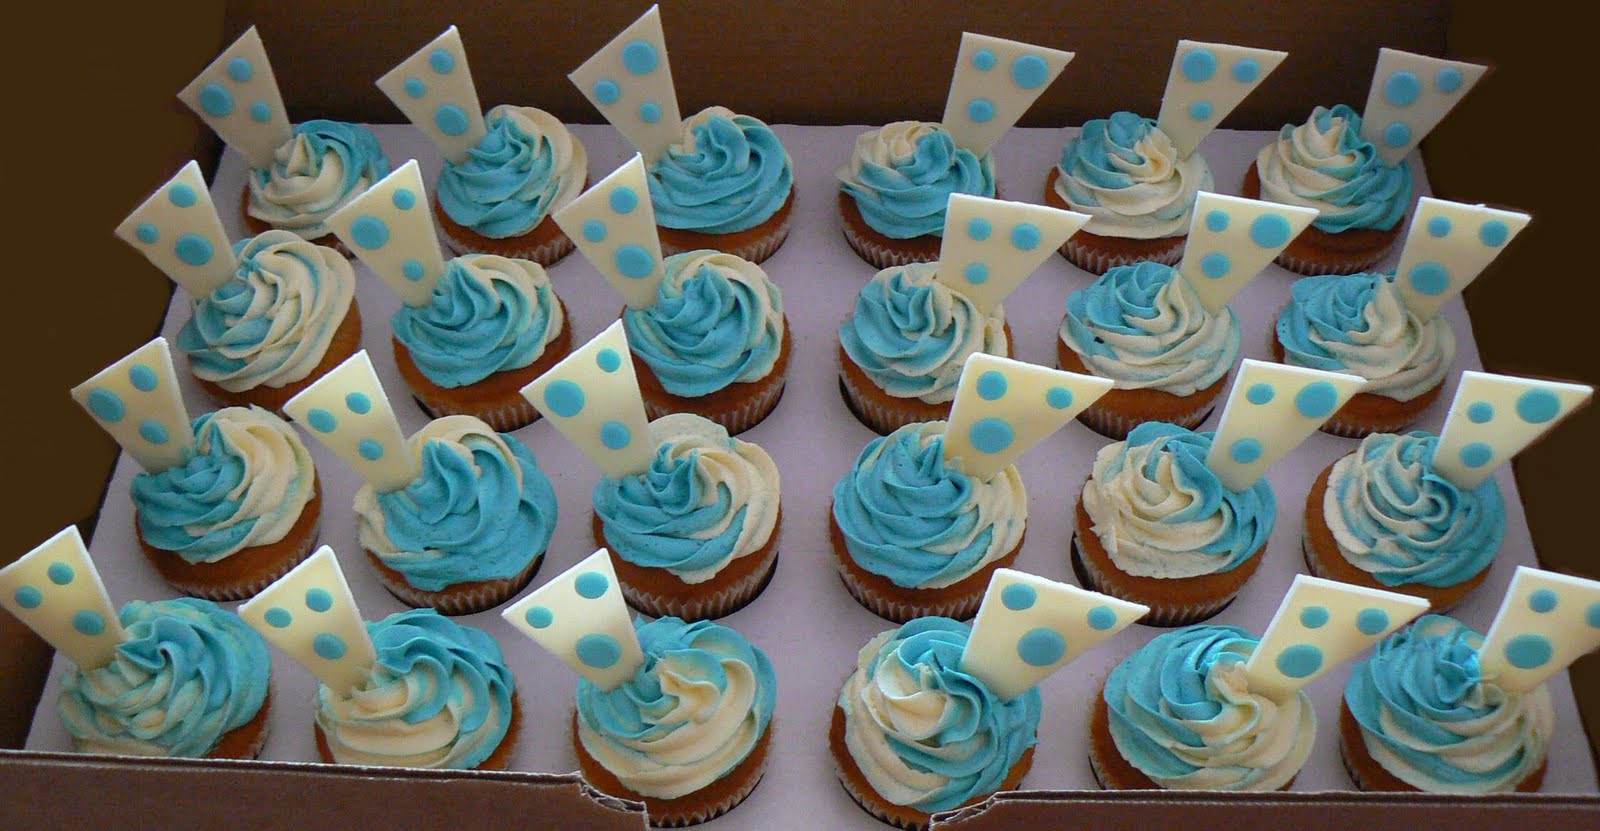 Baby Shower Cupcakes Decorations
 70 Baby Shower Cakes and Cupcakes Ideas